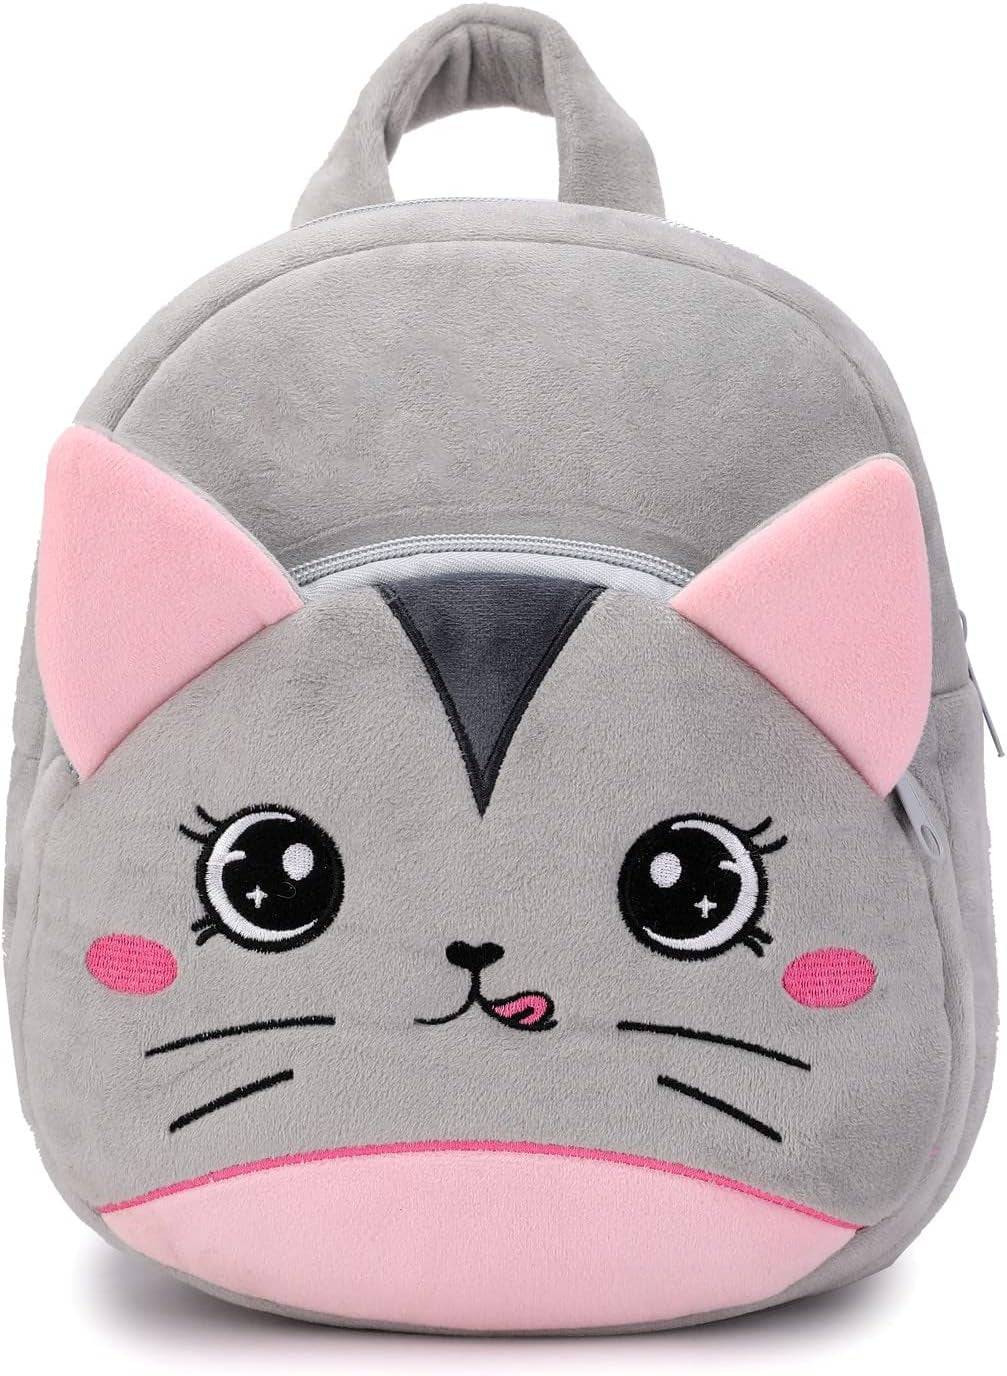 Toddler Backpack for Boys and Girls, Cute Soft Plush Animal Cartoon Mini Backpack Little for Kids 2-6 Years (Cat)